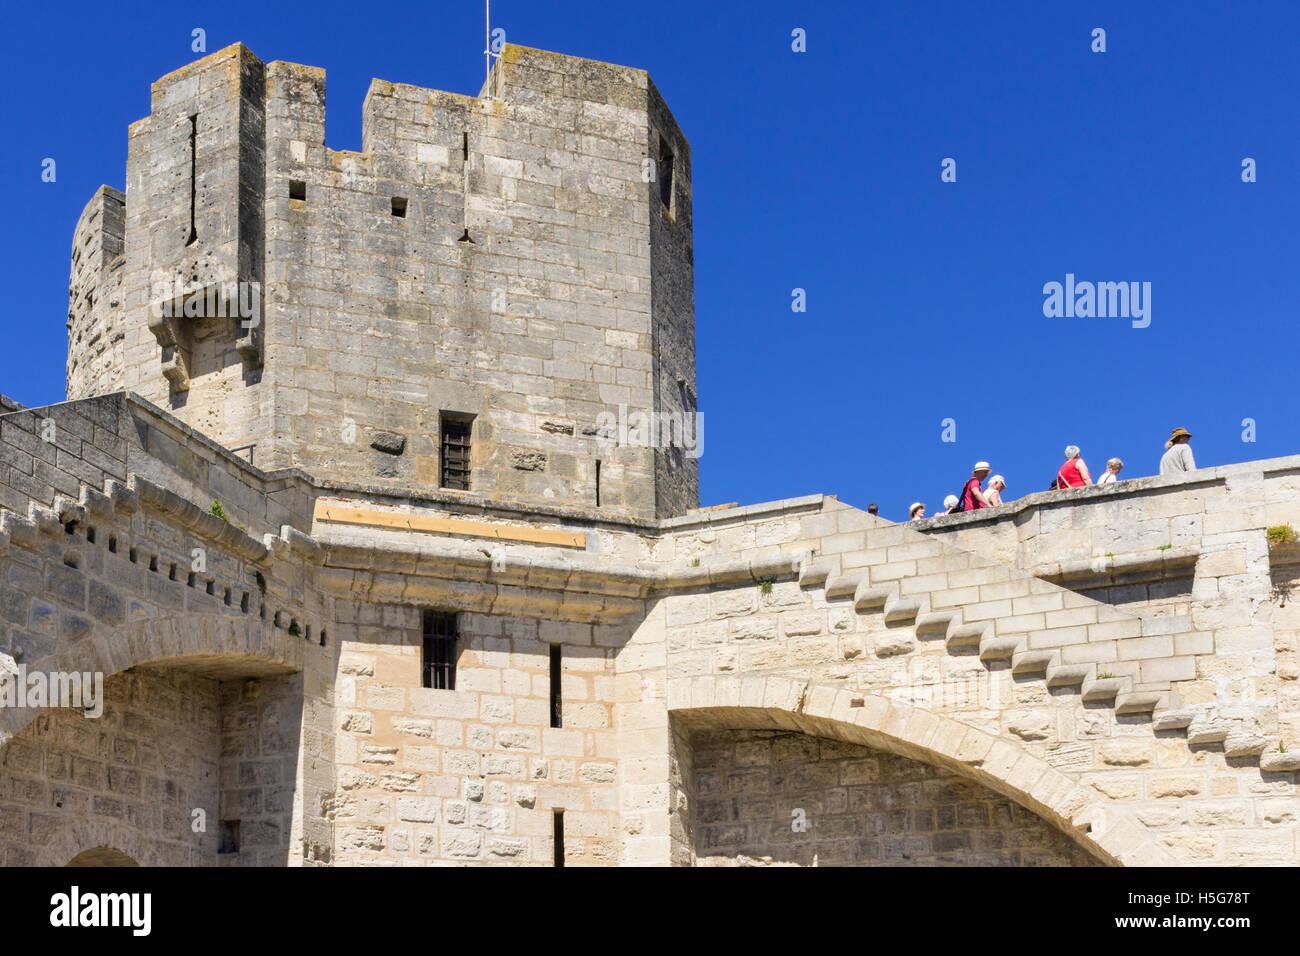 Tourists walking the medieval walls of Aigues-Mortes, France Stock Photo